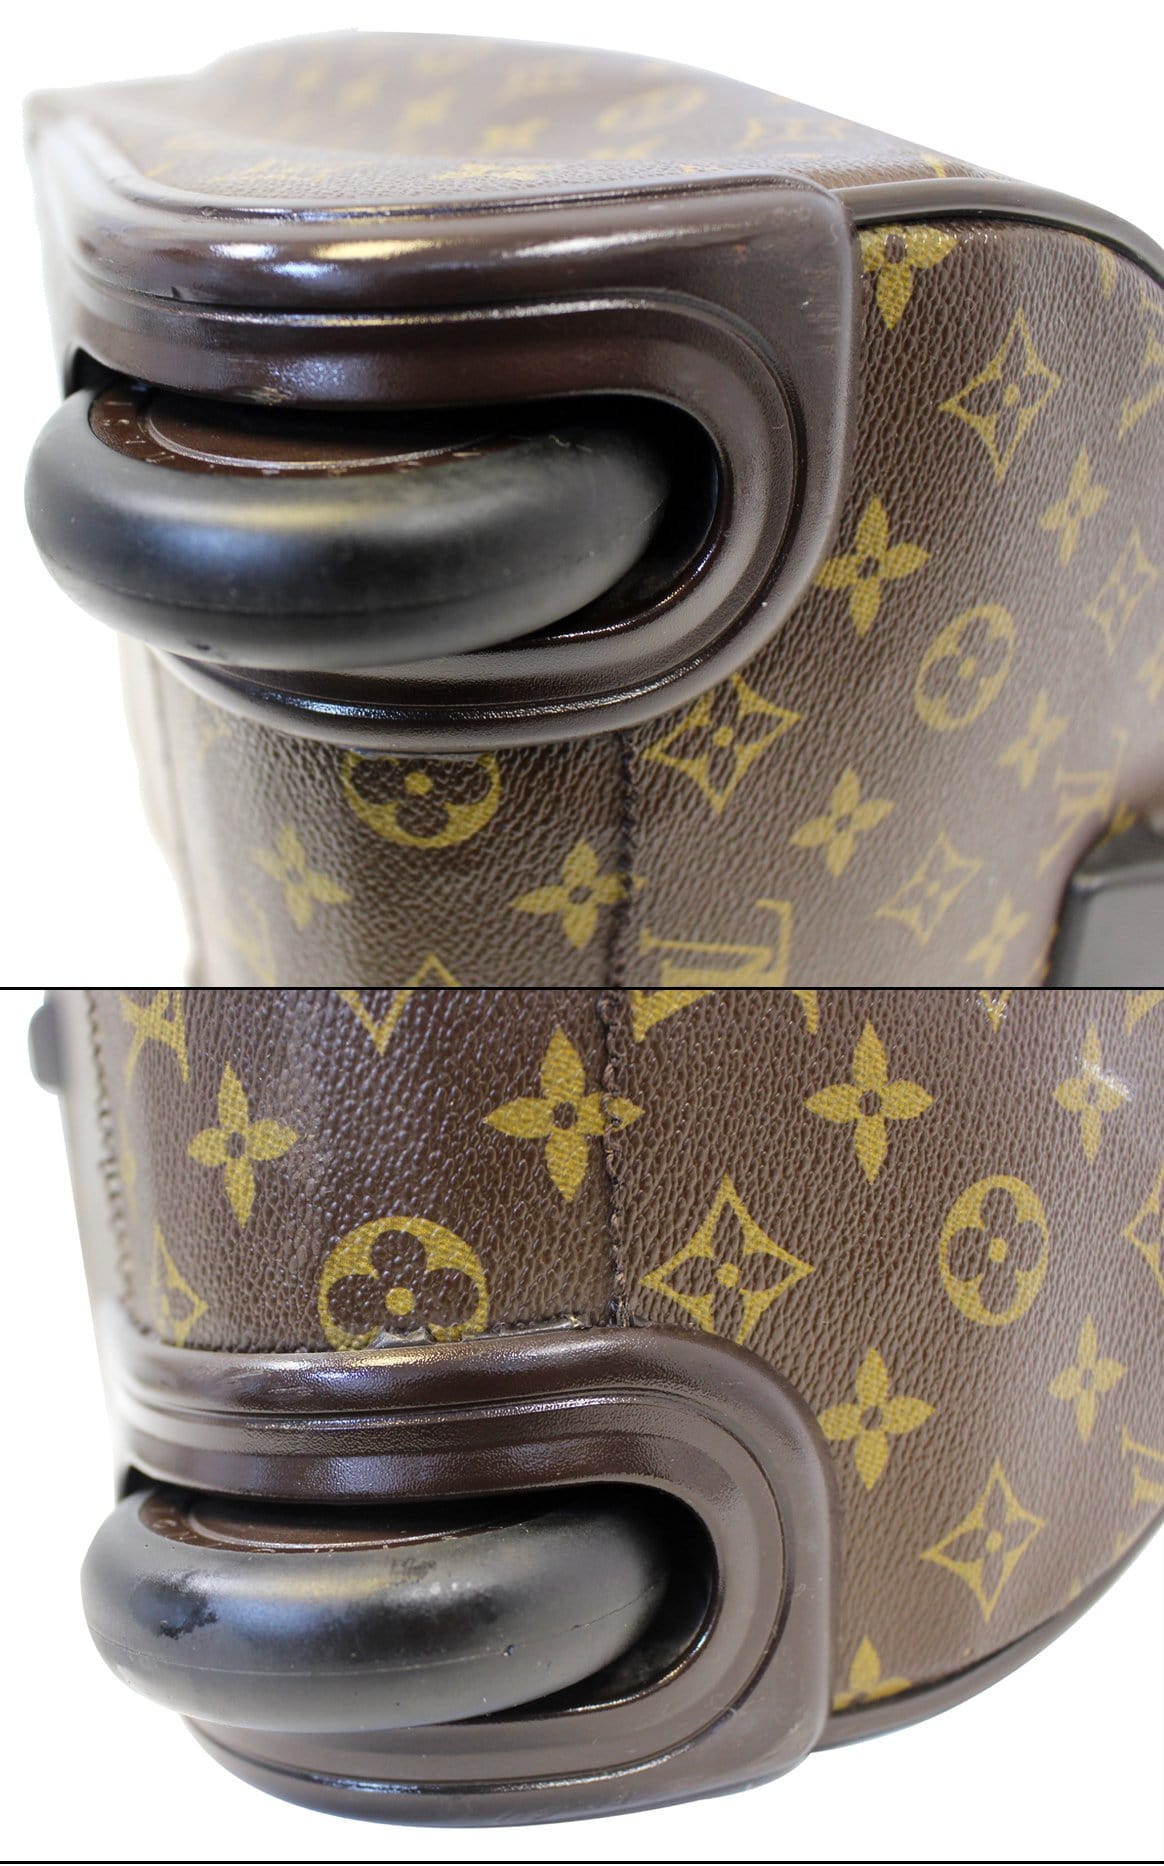 Louis Vuitton Monogram Eole 50 Rolling Luggage Convertible Duffle 3LVJ0119  For Sale at 1stDibs